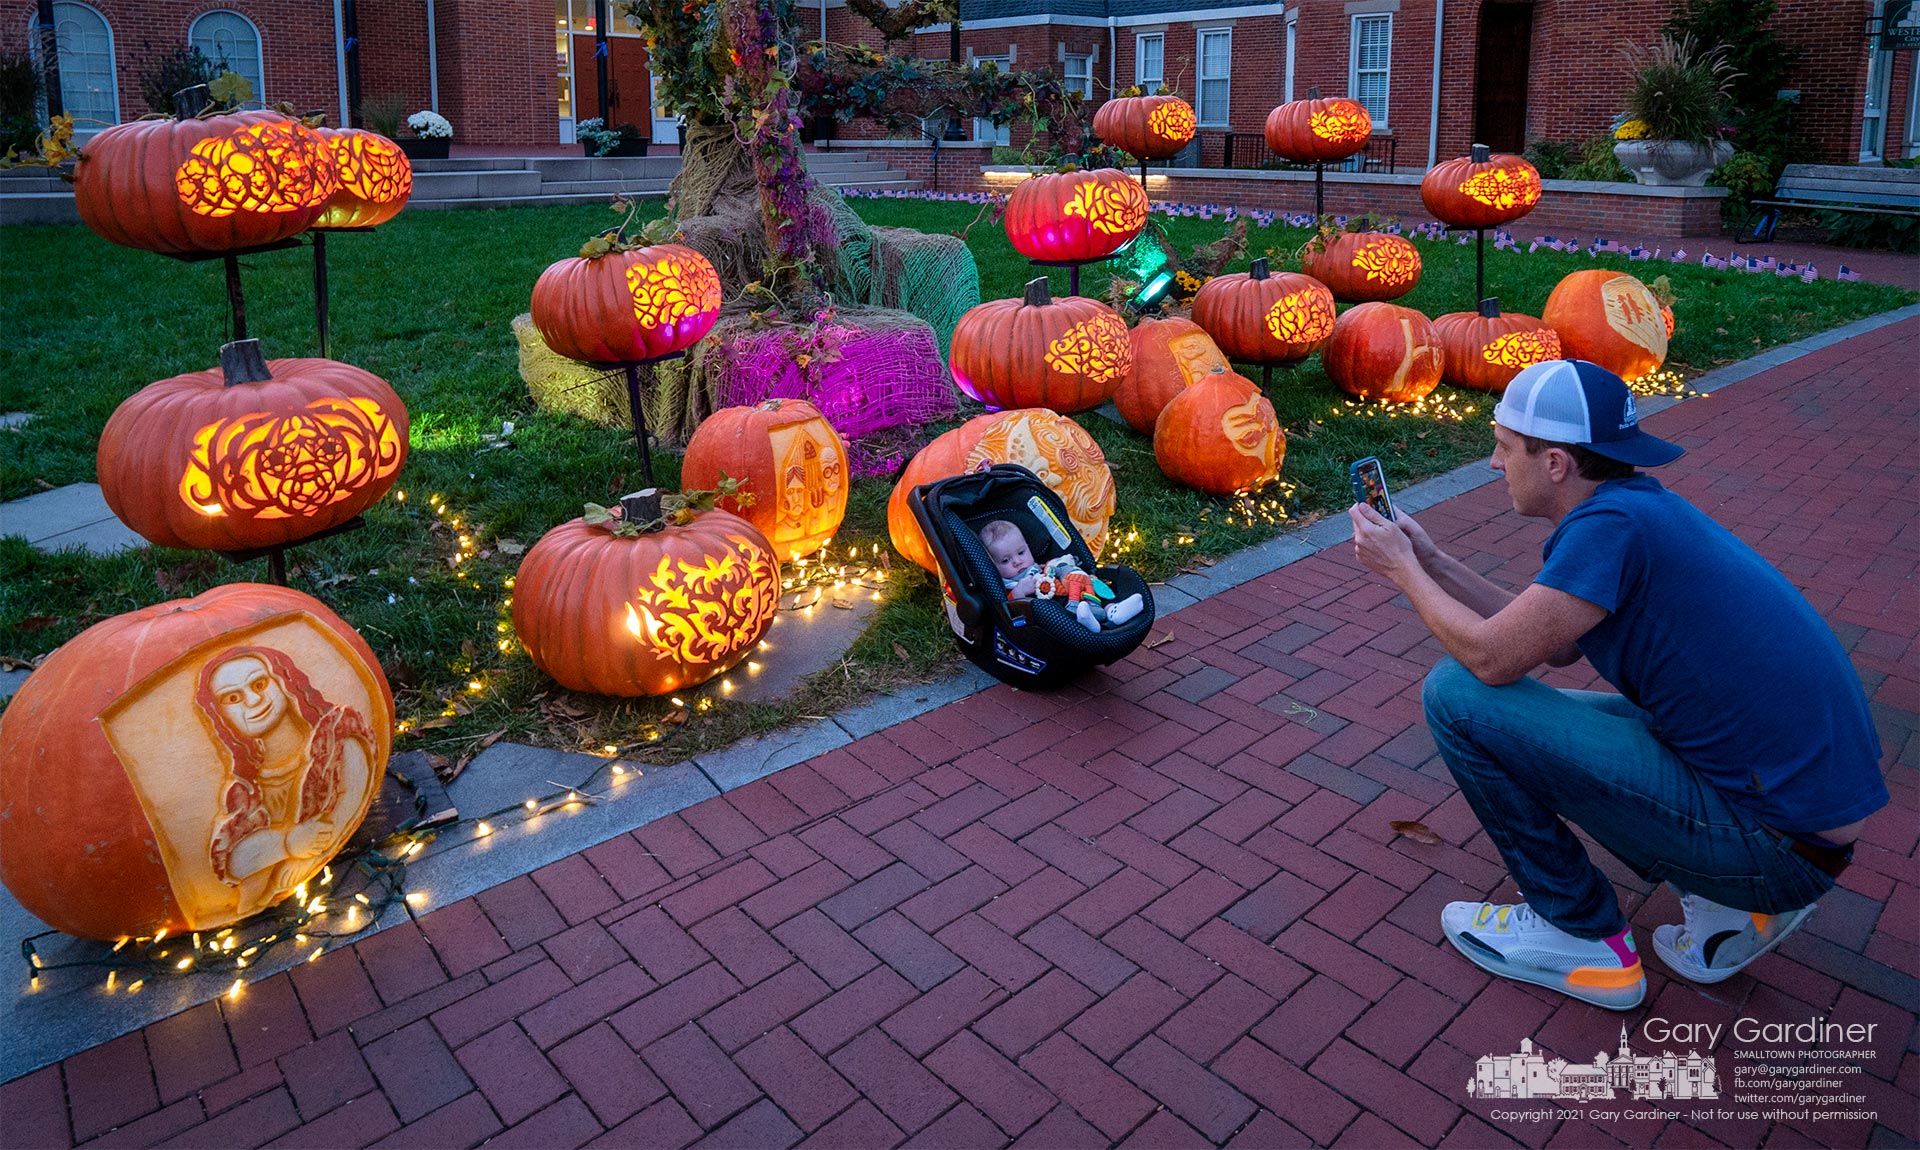 A father photographs his infant child settled into a carrier in front of the Pumpkin Glow display at Westerville City Hall. My Final Photo for Oct. 20, 2021.